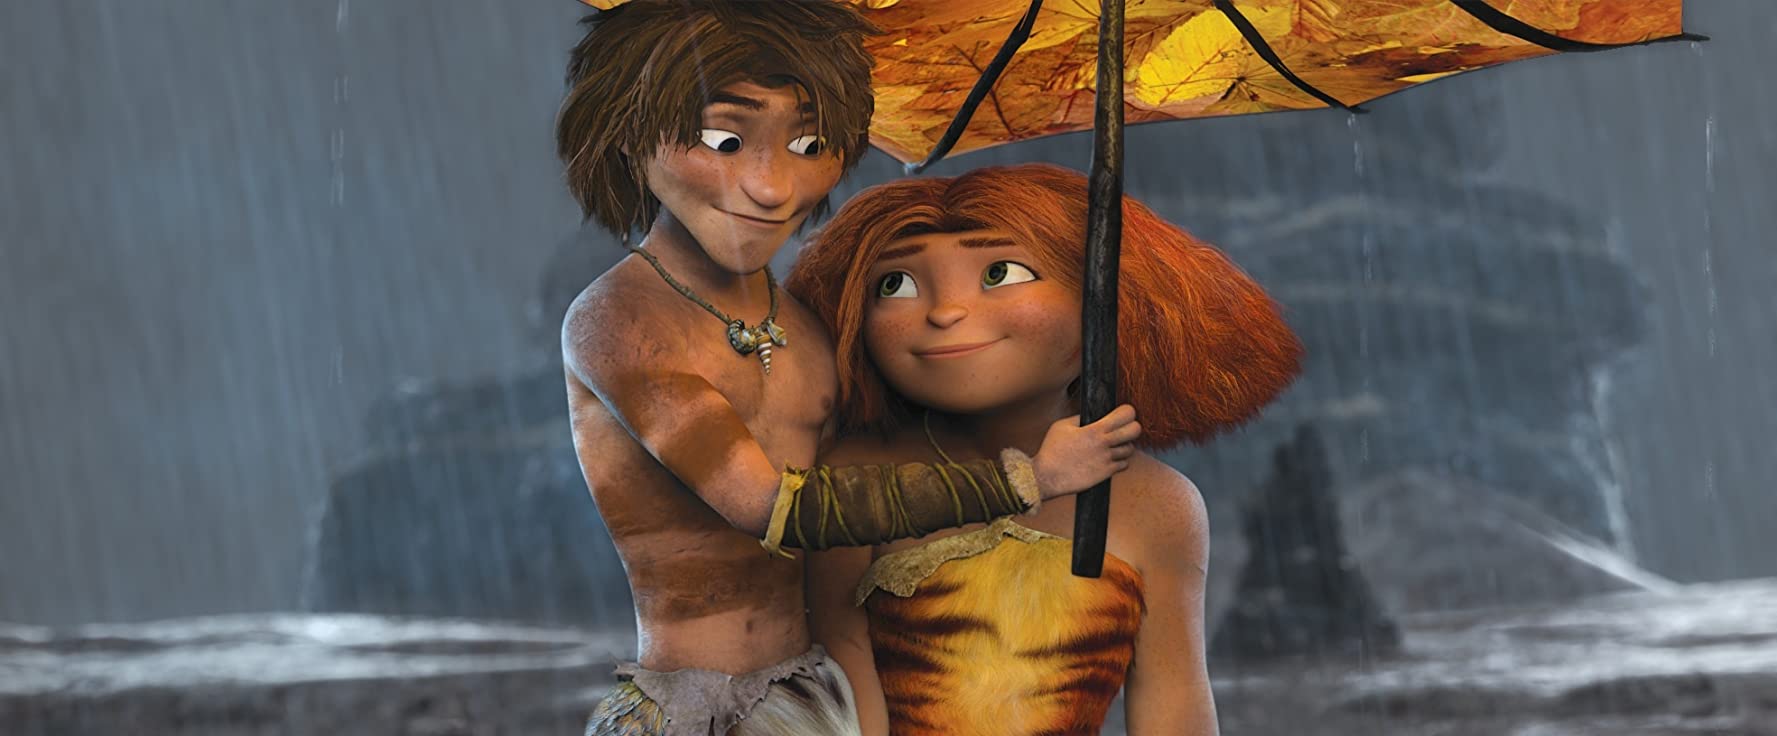 Popcorn and Inspiration: “The Croods”: A Good Lesson About Adaptability